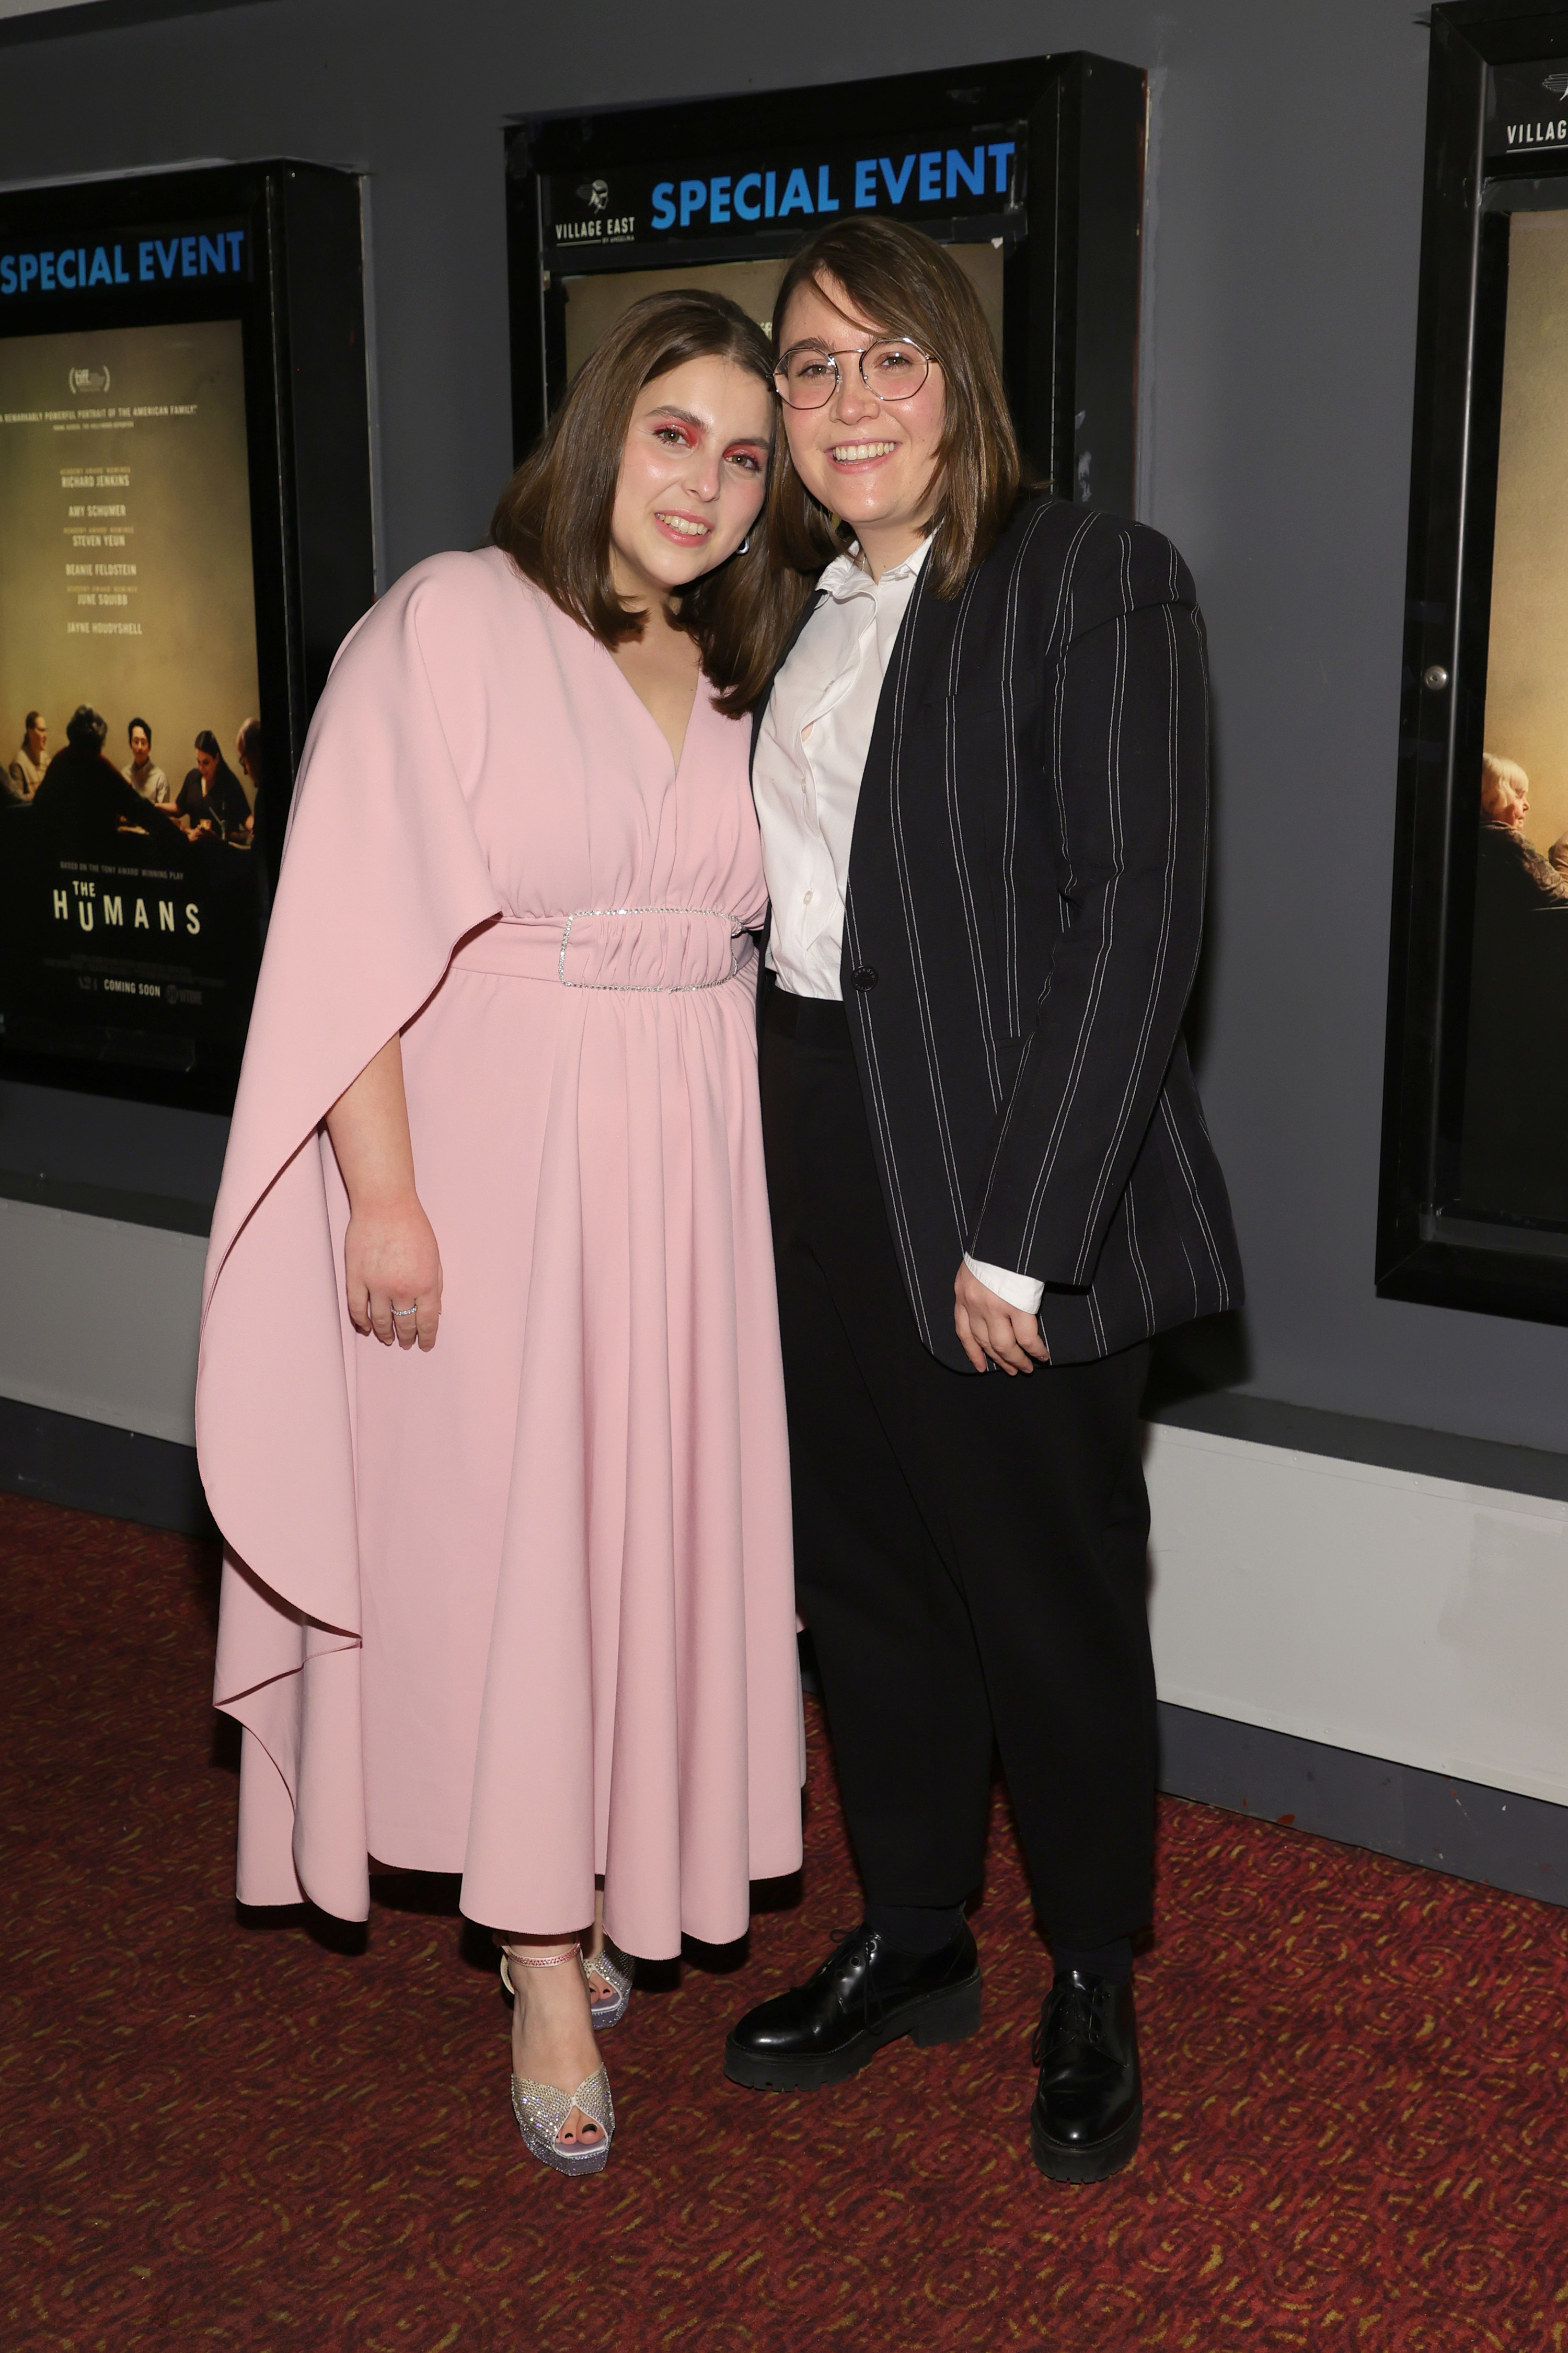 Beanie Feldstein and Bonnie Chance Roberts dressed up at an event